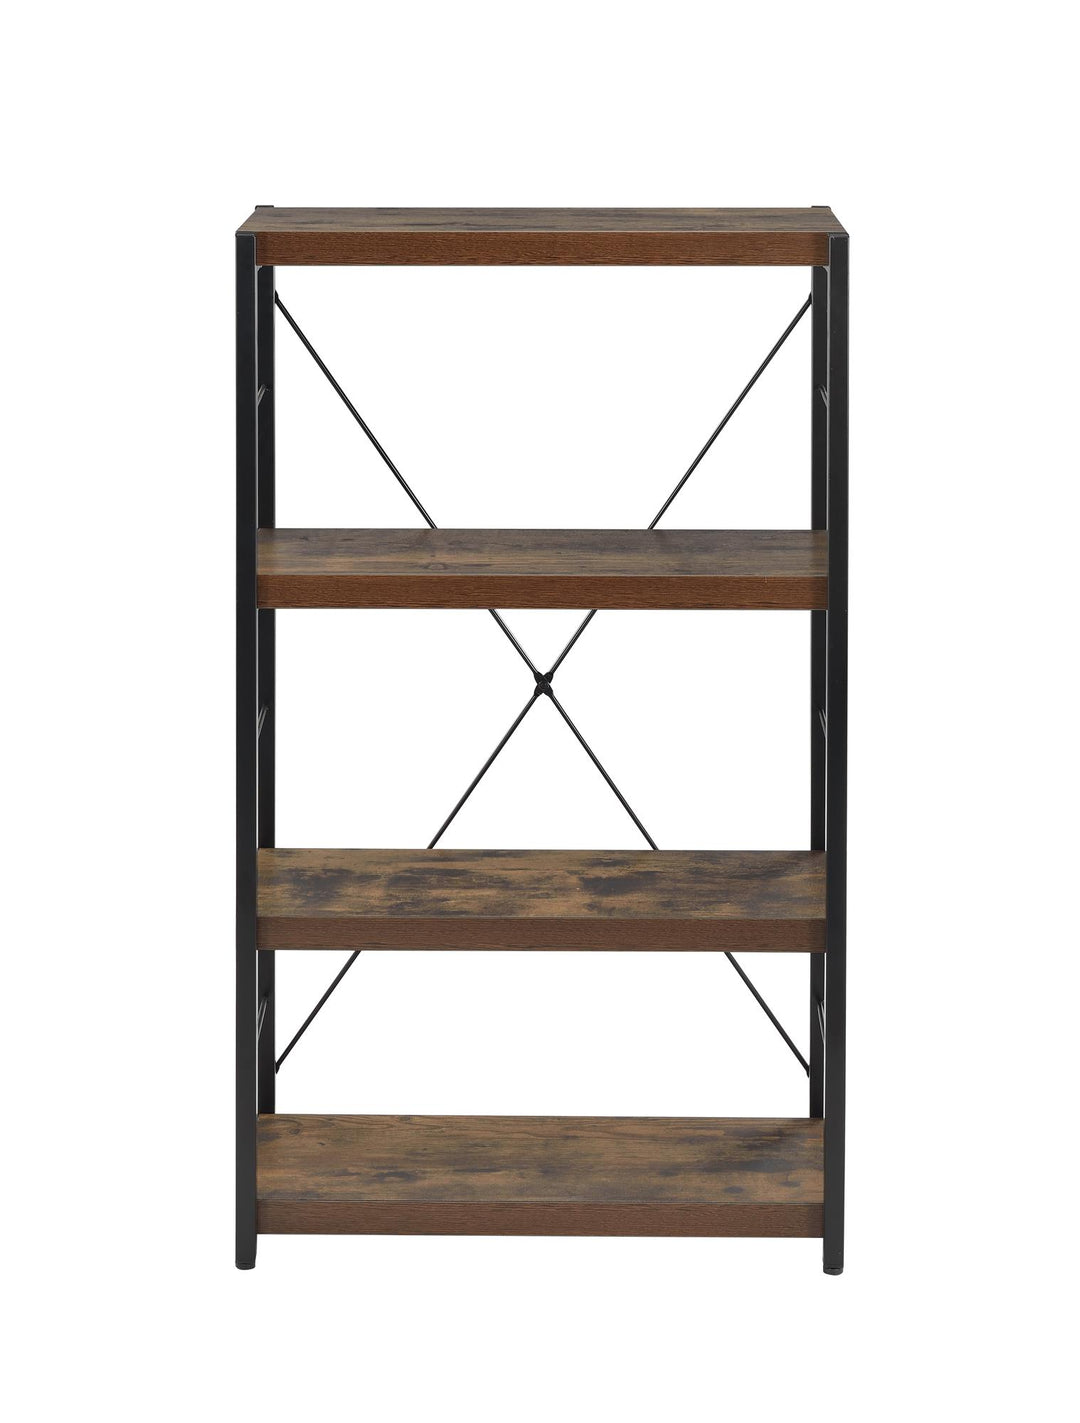 Bob Industrial Bookshelf with 4 Shelves and X Back Stretcher - Weathered Oak